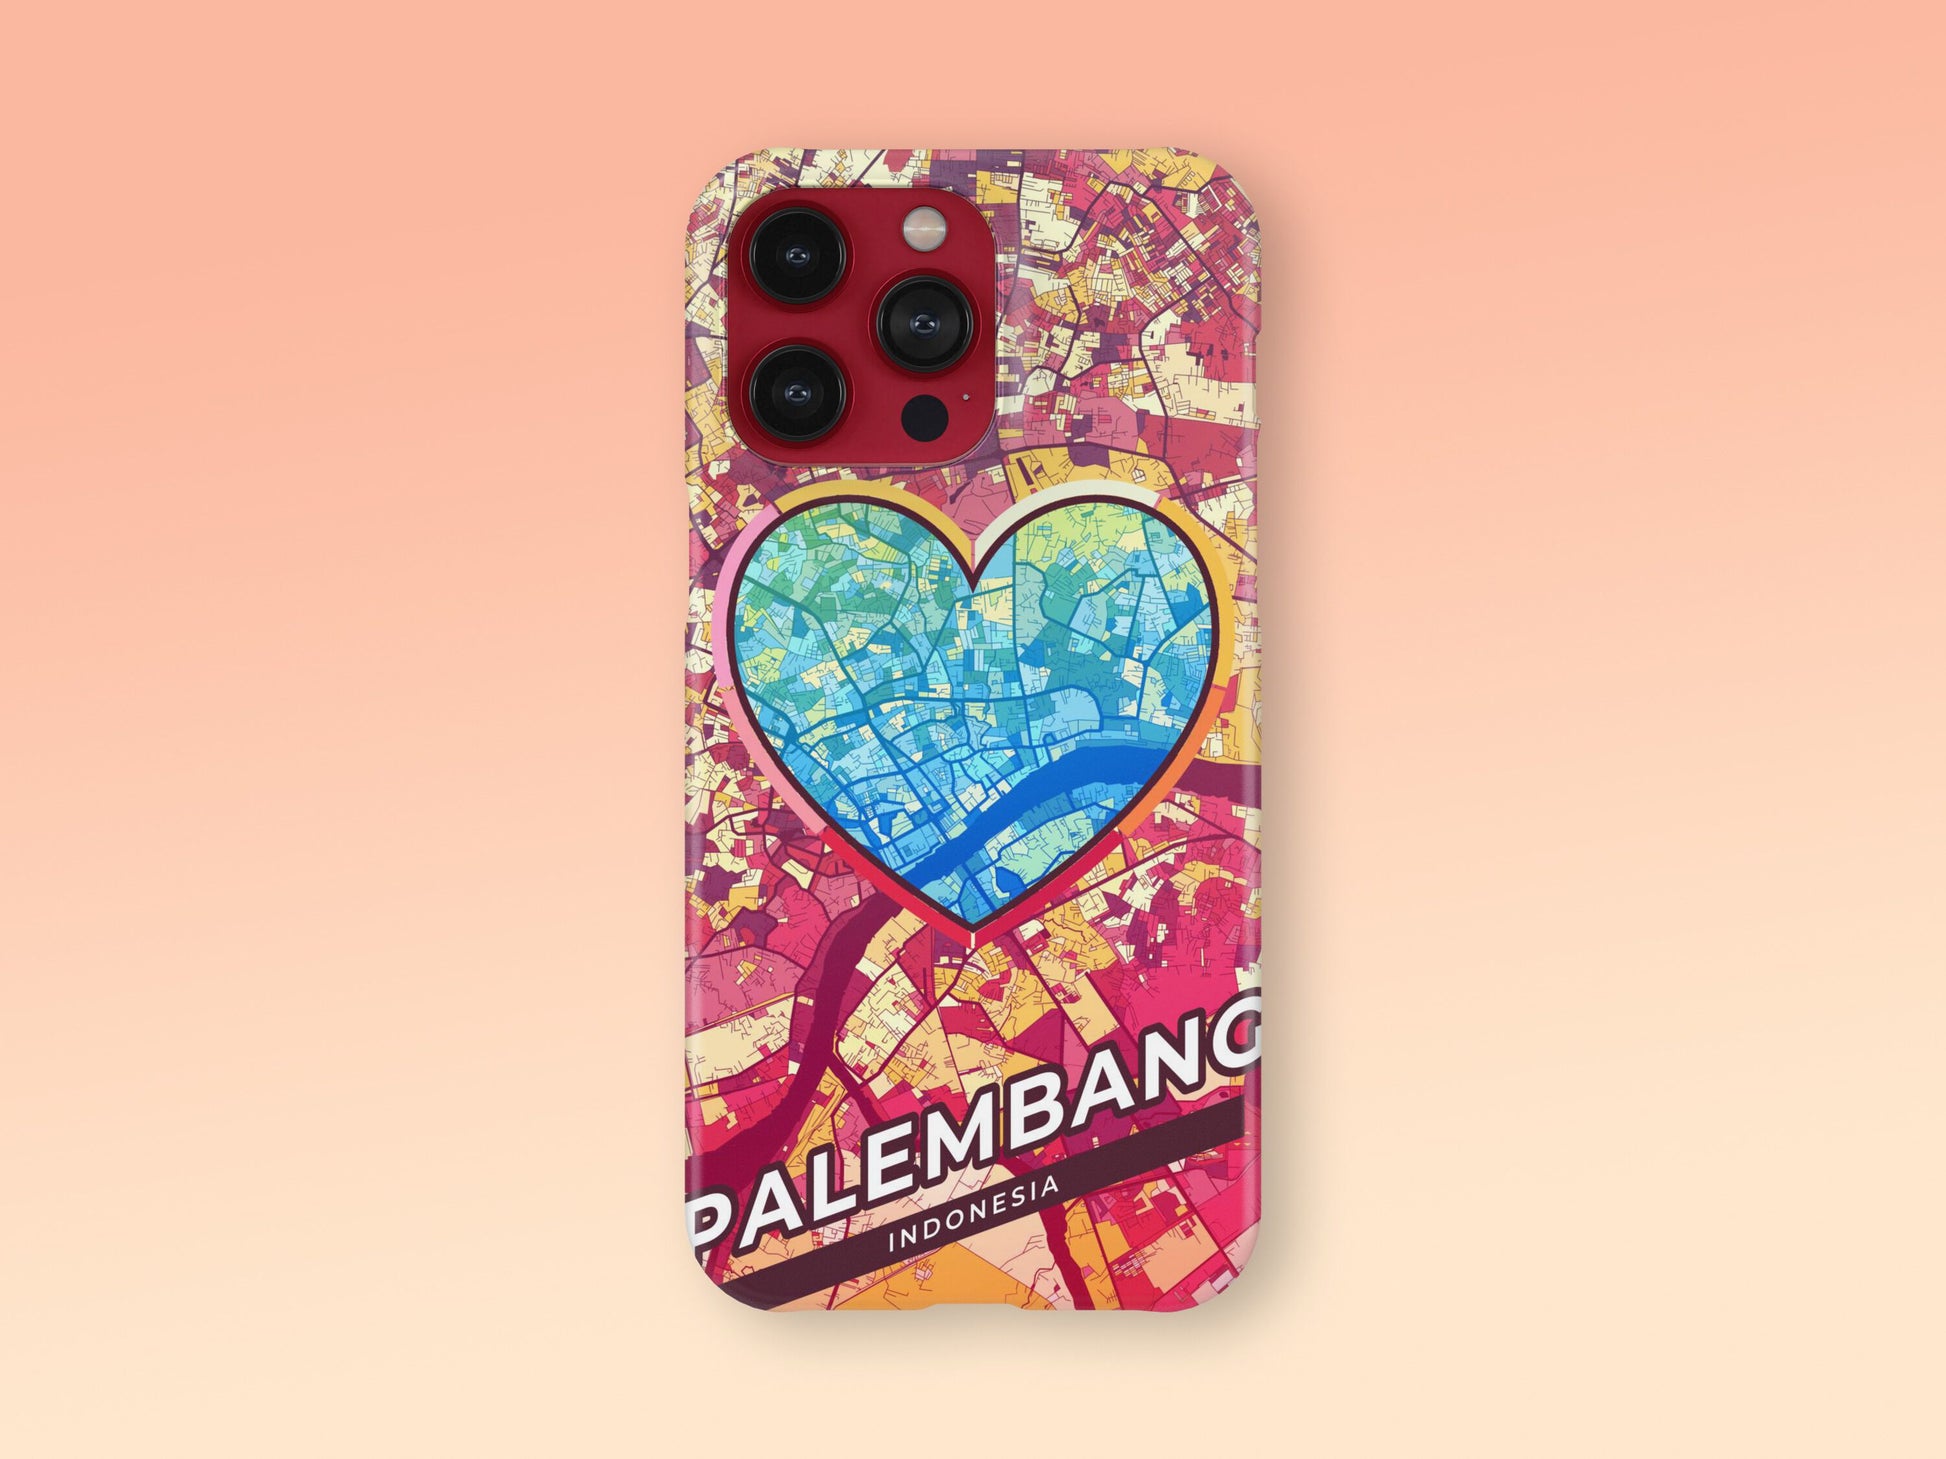 Palembang Indonesia slim phone case with colorful icon 2